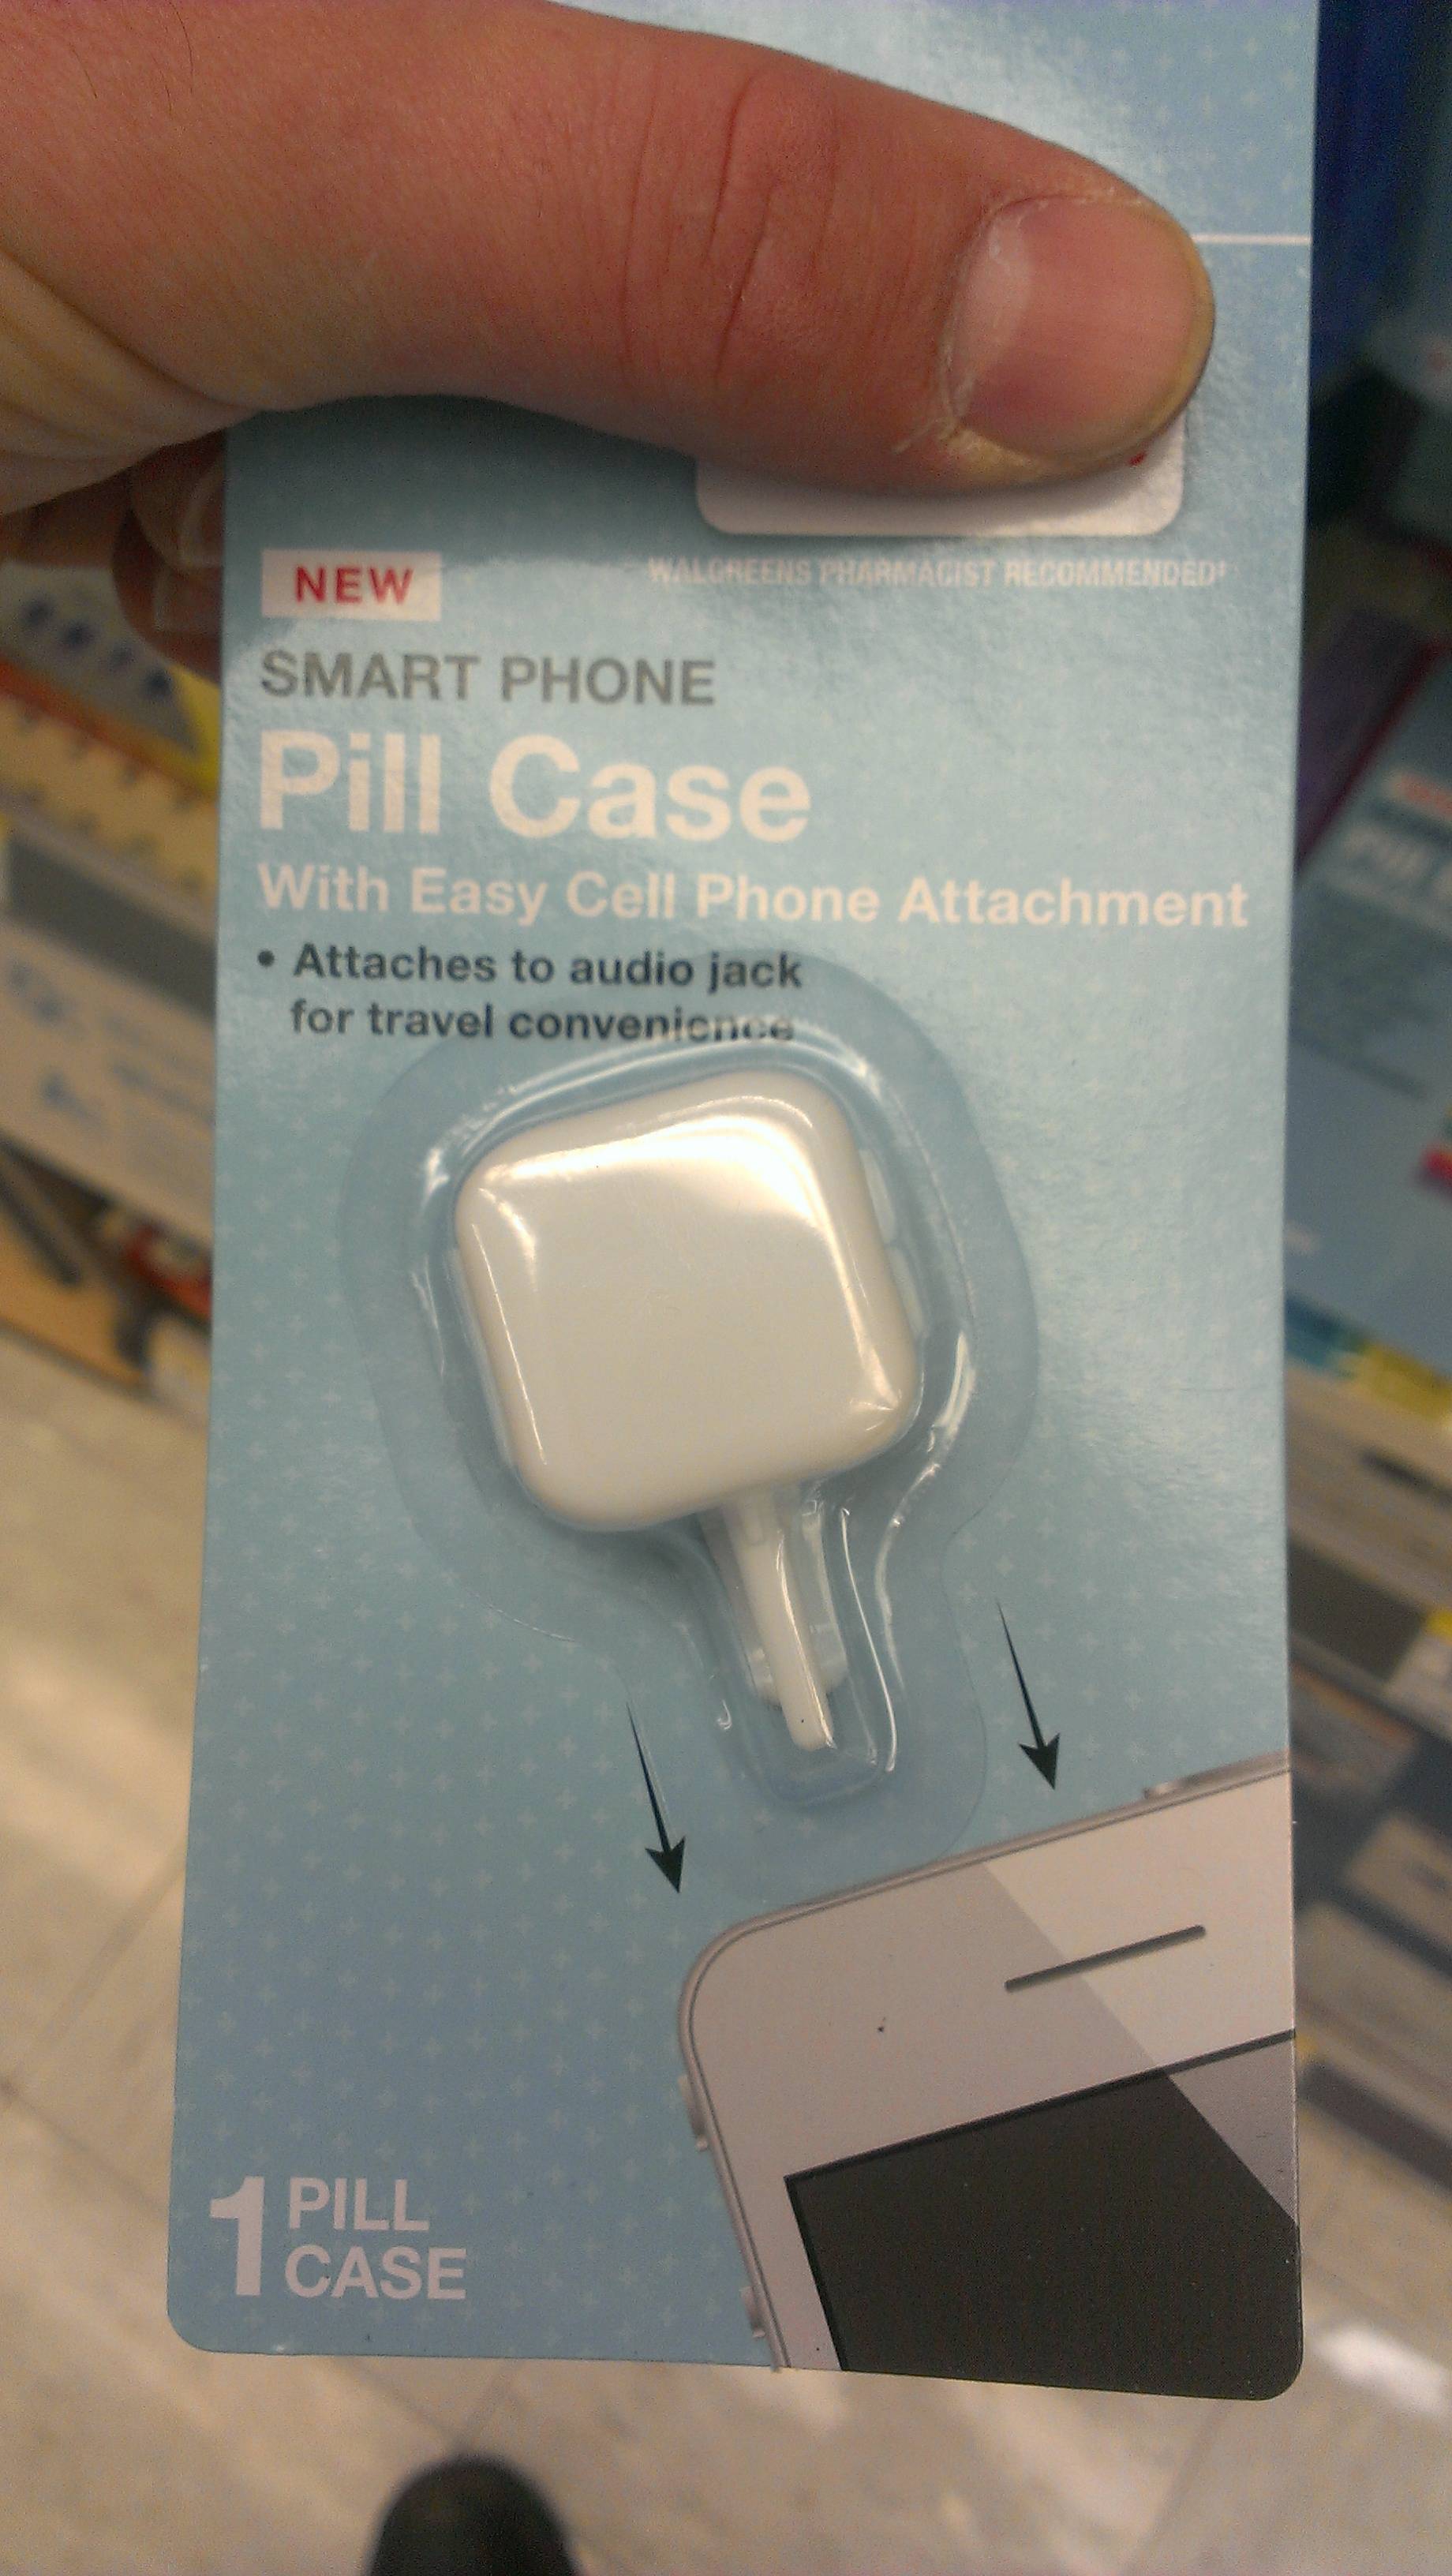 electronics - New Walgreens Pharmacist Recommended Smart Phone Pill Case With Easy Cell Phone Attachment Attaches to audio jack for travel convenience Pill I Case